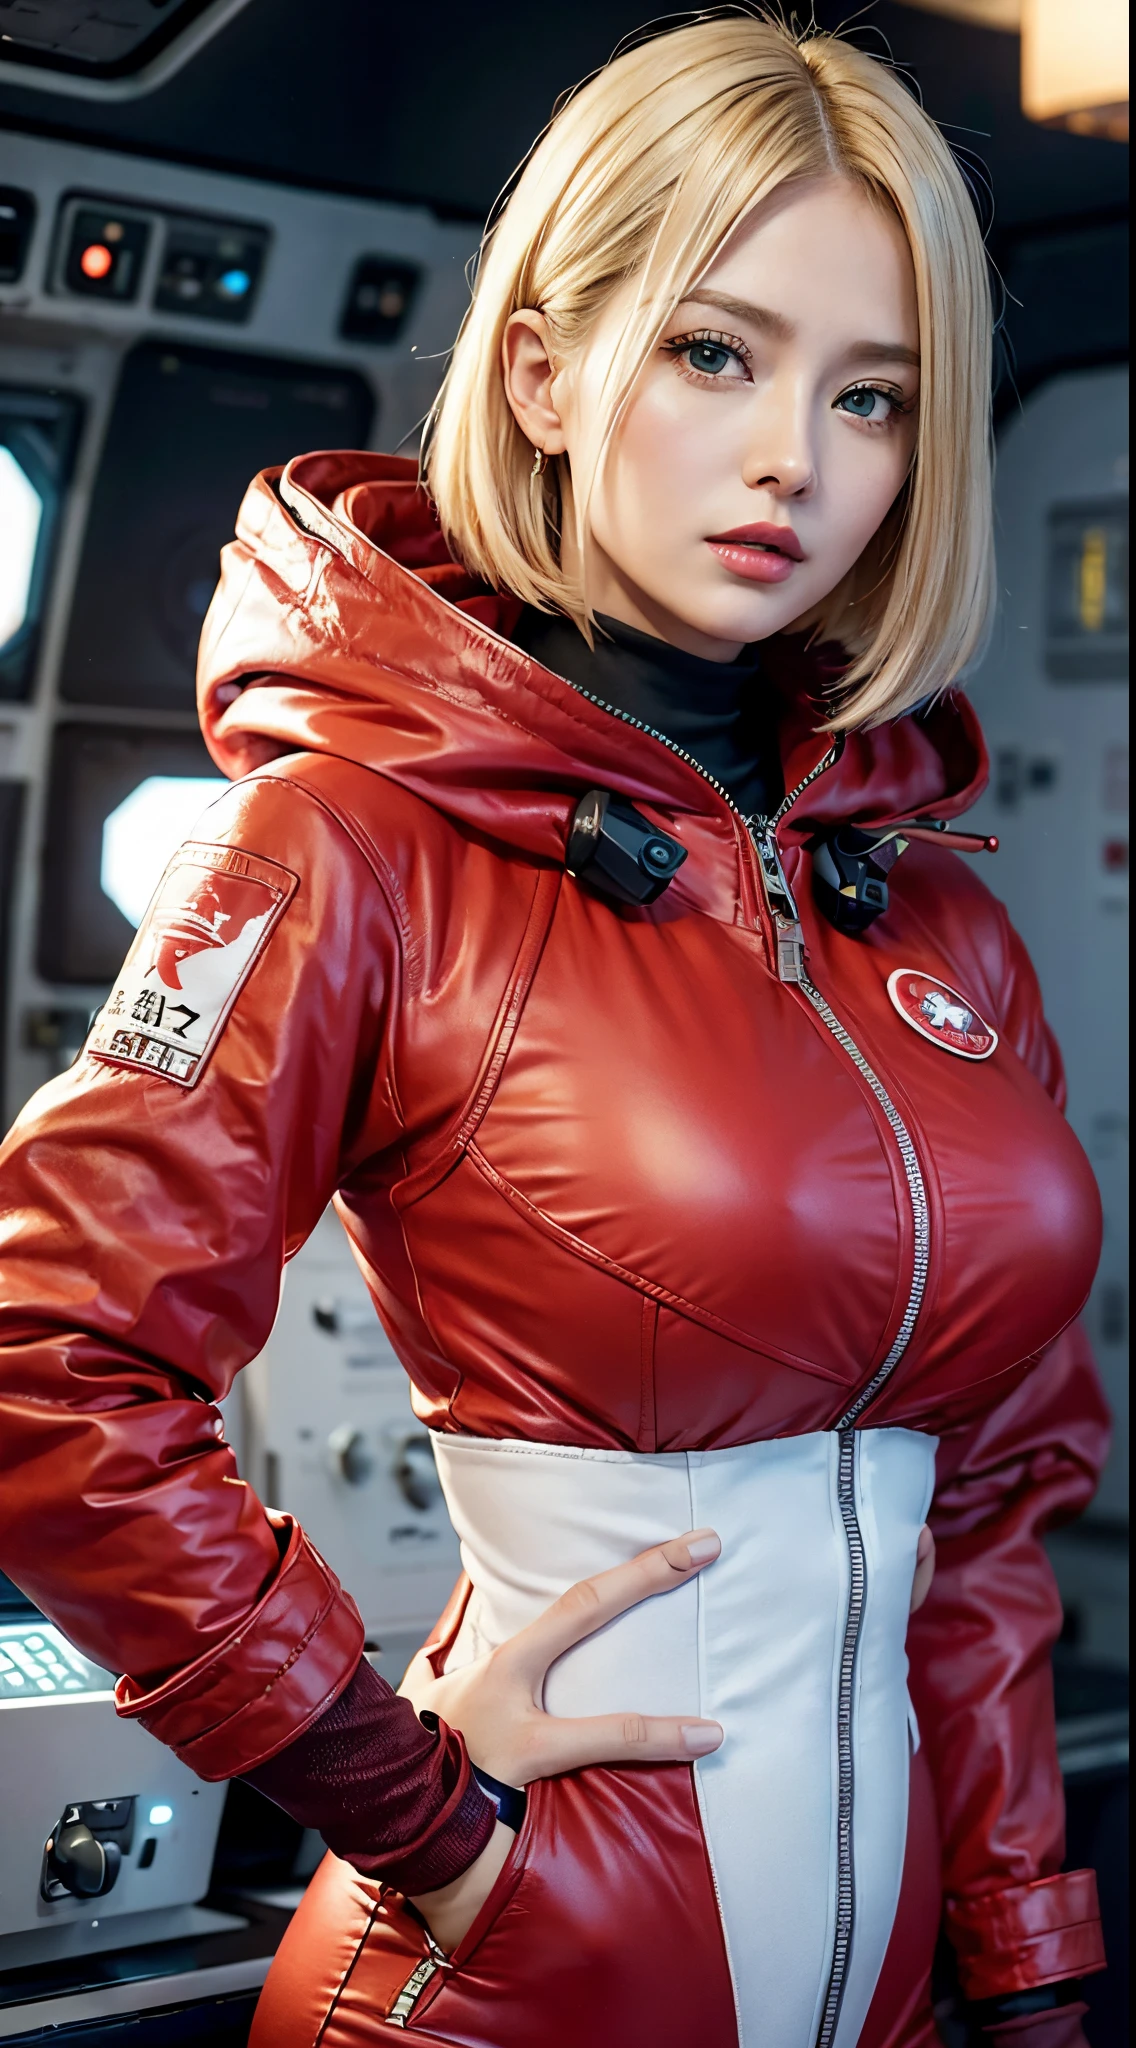 (hyper realstic)、Future Female Pilots、
immensity　Beautie　high-level image quality　hight resolution　Realistic　Shorthair　a blond、　blond woman in a、A MILF、Middle-aged woman、((Big big))、detailed skin textures、超A high resolution、Realistic、Voluptuous body shape、angry looking face、Middle-aged beauty、Beautiful expression、Detailed green ironed fluffy hair、Kamimei、Very delicate and detailed skin texture、３５A woman pilots a giant space station)、female pilot batlight red lips、((Wear a red flight suit))、(((Alone)))、